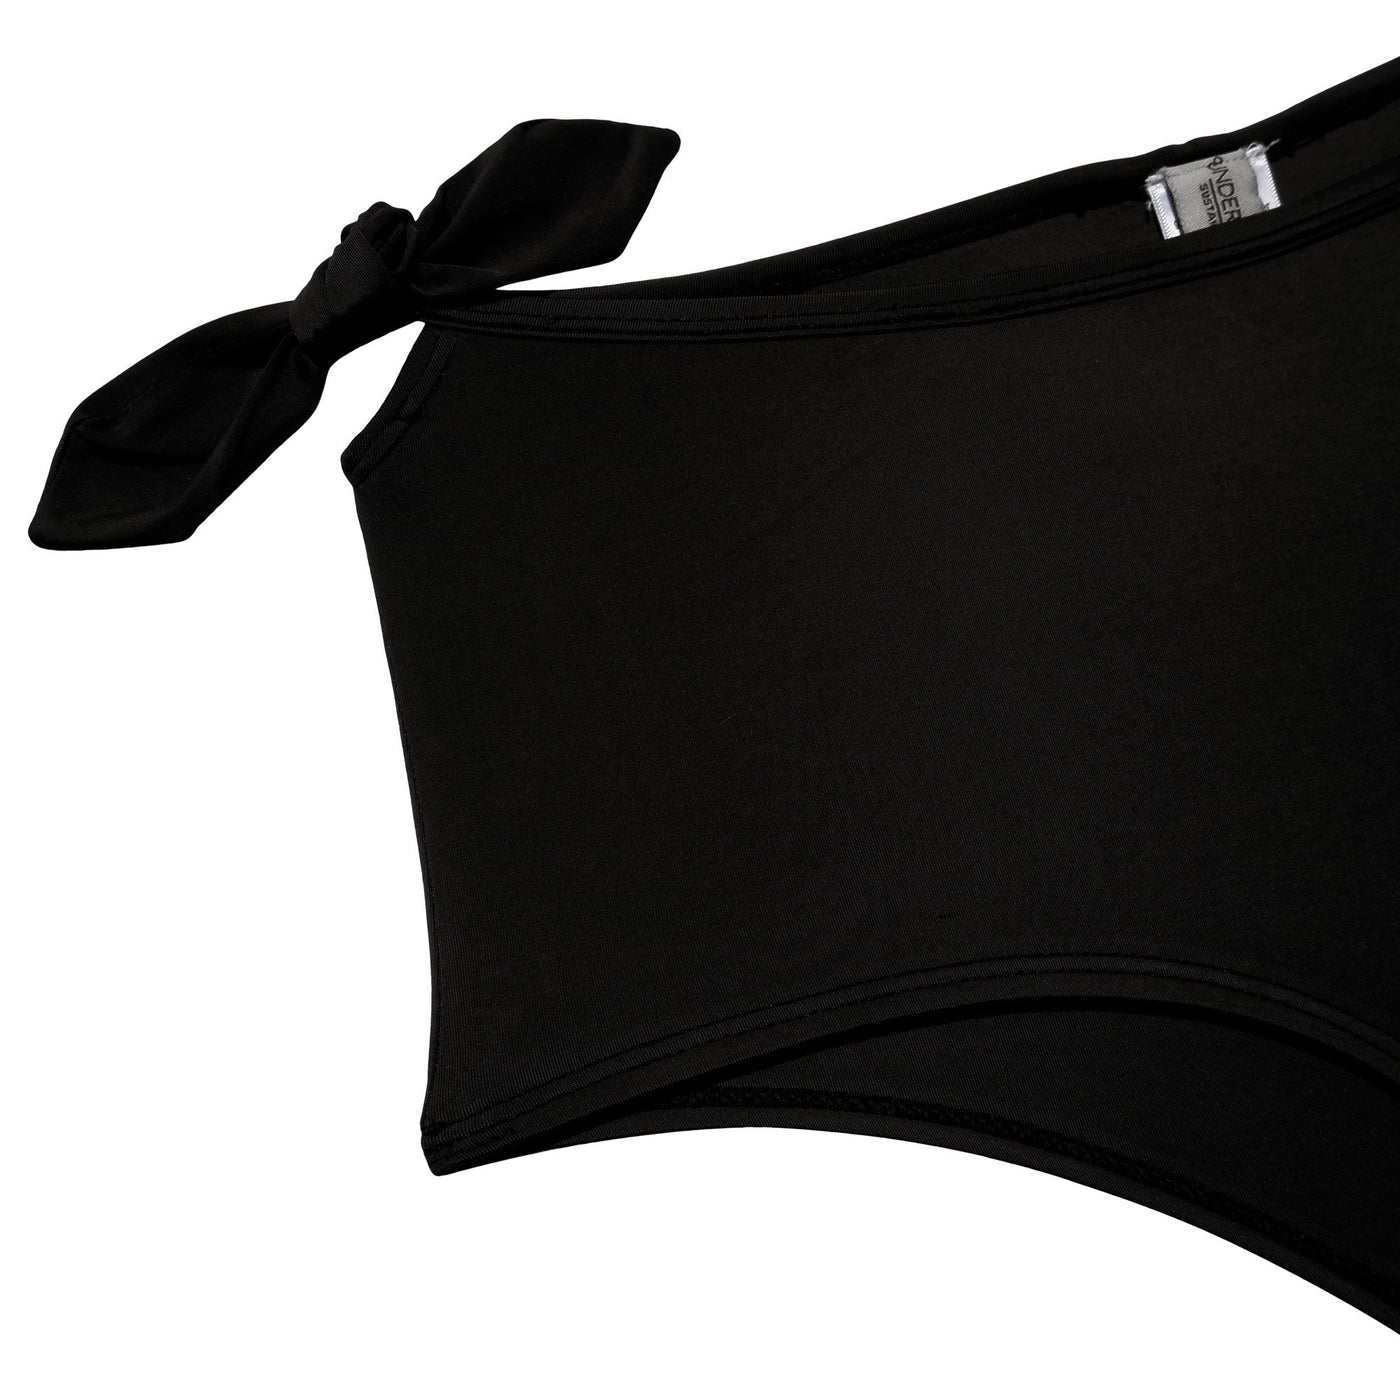 The Manon Bikini Hipster is made in our soft recycled polyester fabric. Sustainable swimwear.